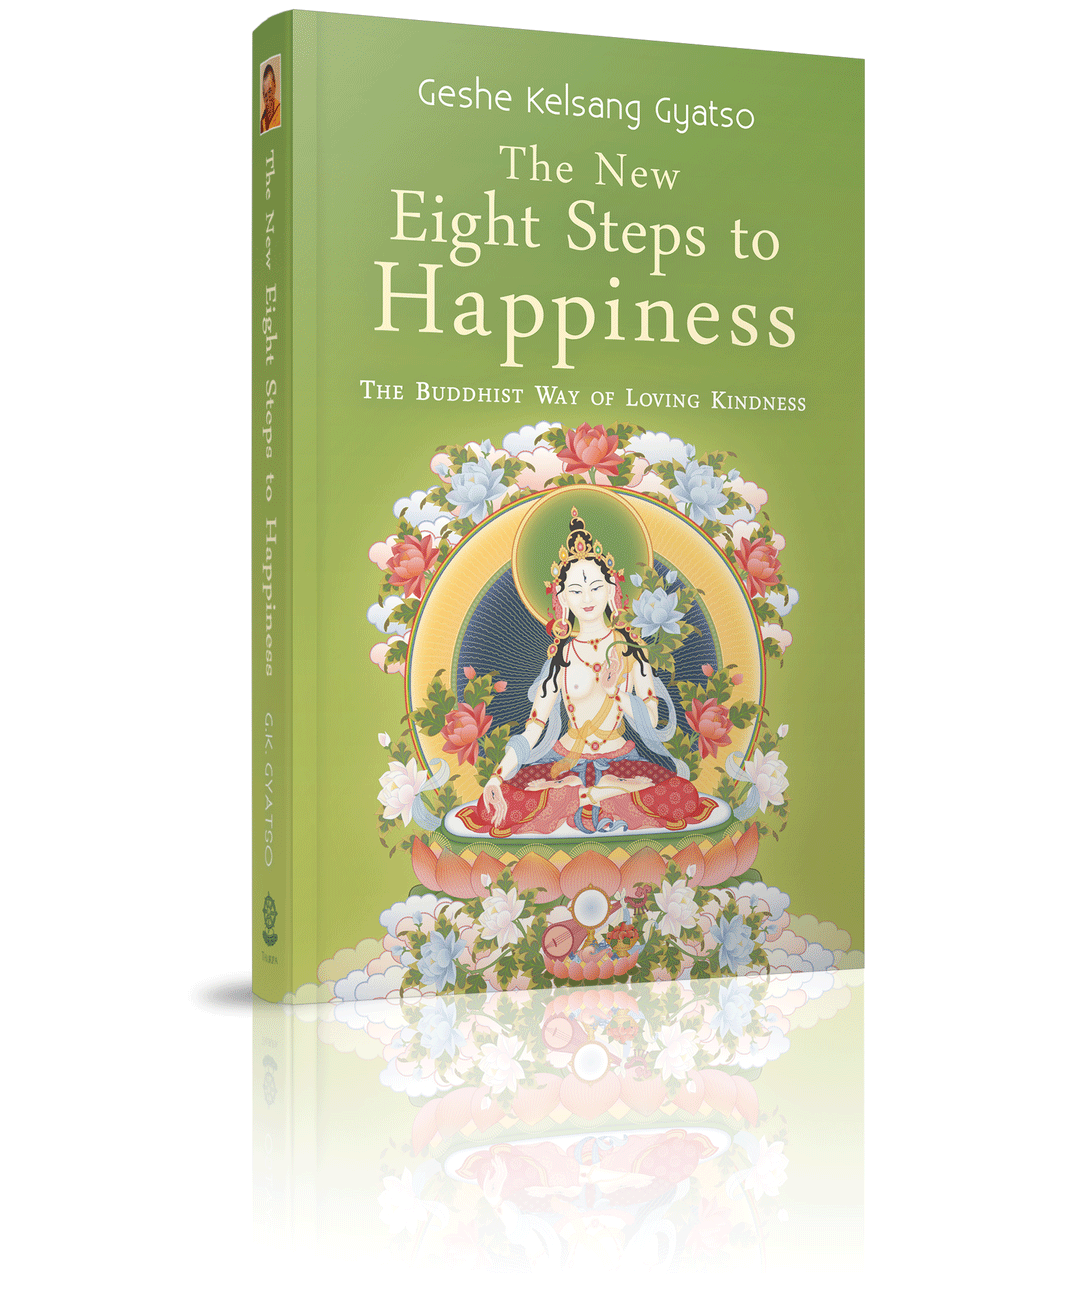 The New Eight Steps to Happiness by Geshe Kelsang Gyatso